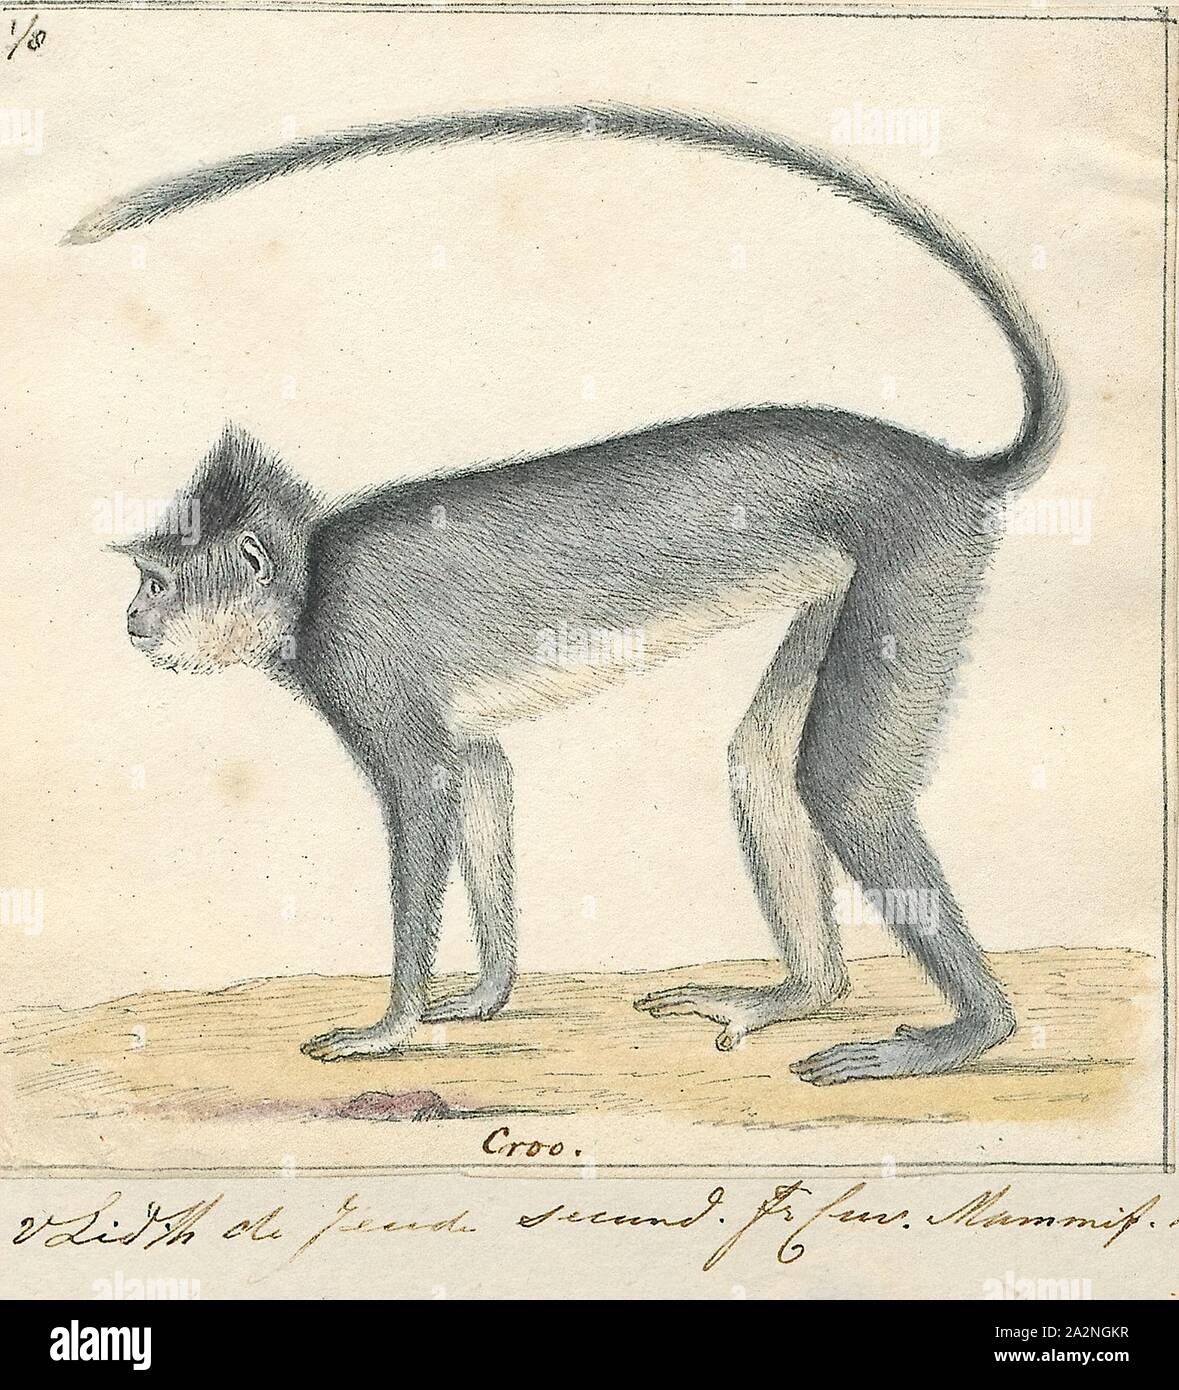 Semnopithecus comatus, Print, Gray langurs, sacred langurs, Indian langurs or Hanuman langurs are a group of Old World monkeys native to the Indian subcontinent constituting the entirety of the genus Semnopithecus. Most taxa have traditionally been placed in the single species Semnopithecus entellus. In 2001, it was recommended that several distinctive former subspecies should be given the status of species, so that seven species are recognized.A taxonomic classification with fewer species has also been proposed. Genetic evidence suggests that the Nilgiri langur and purple-faced langur, which Stock Photo